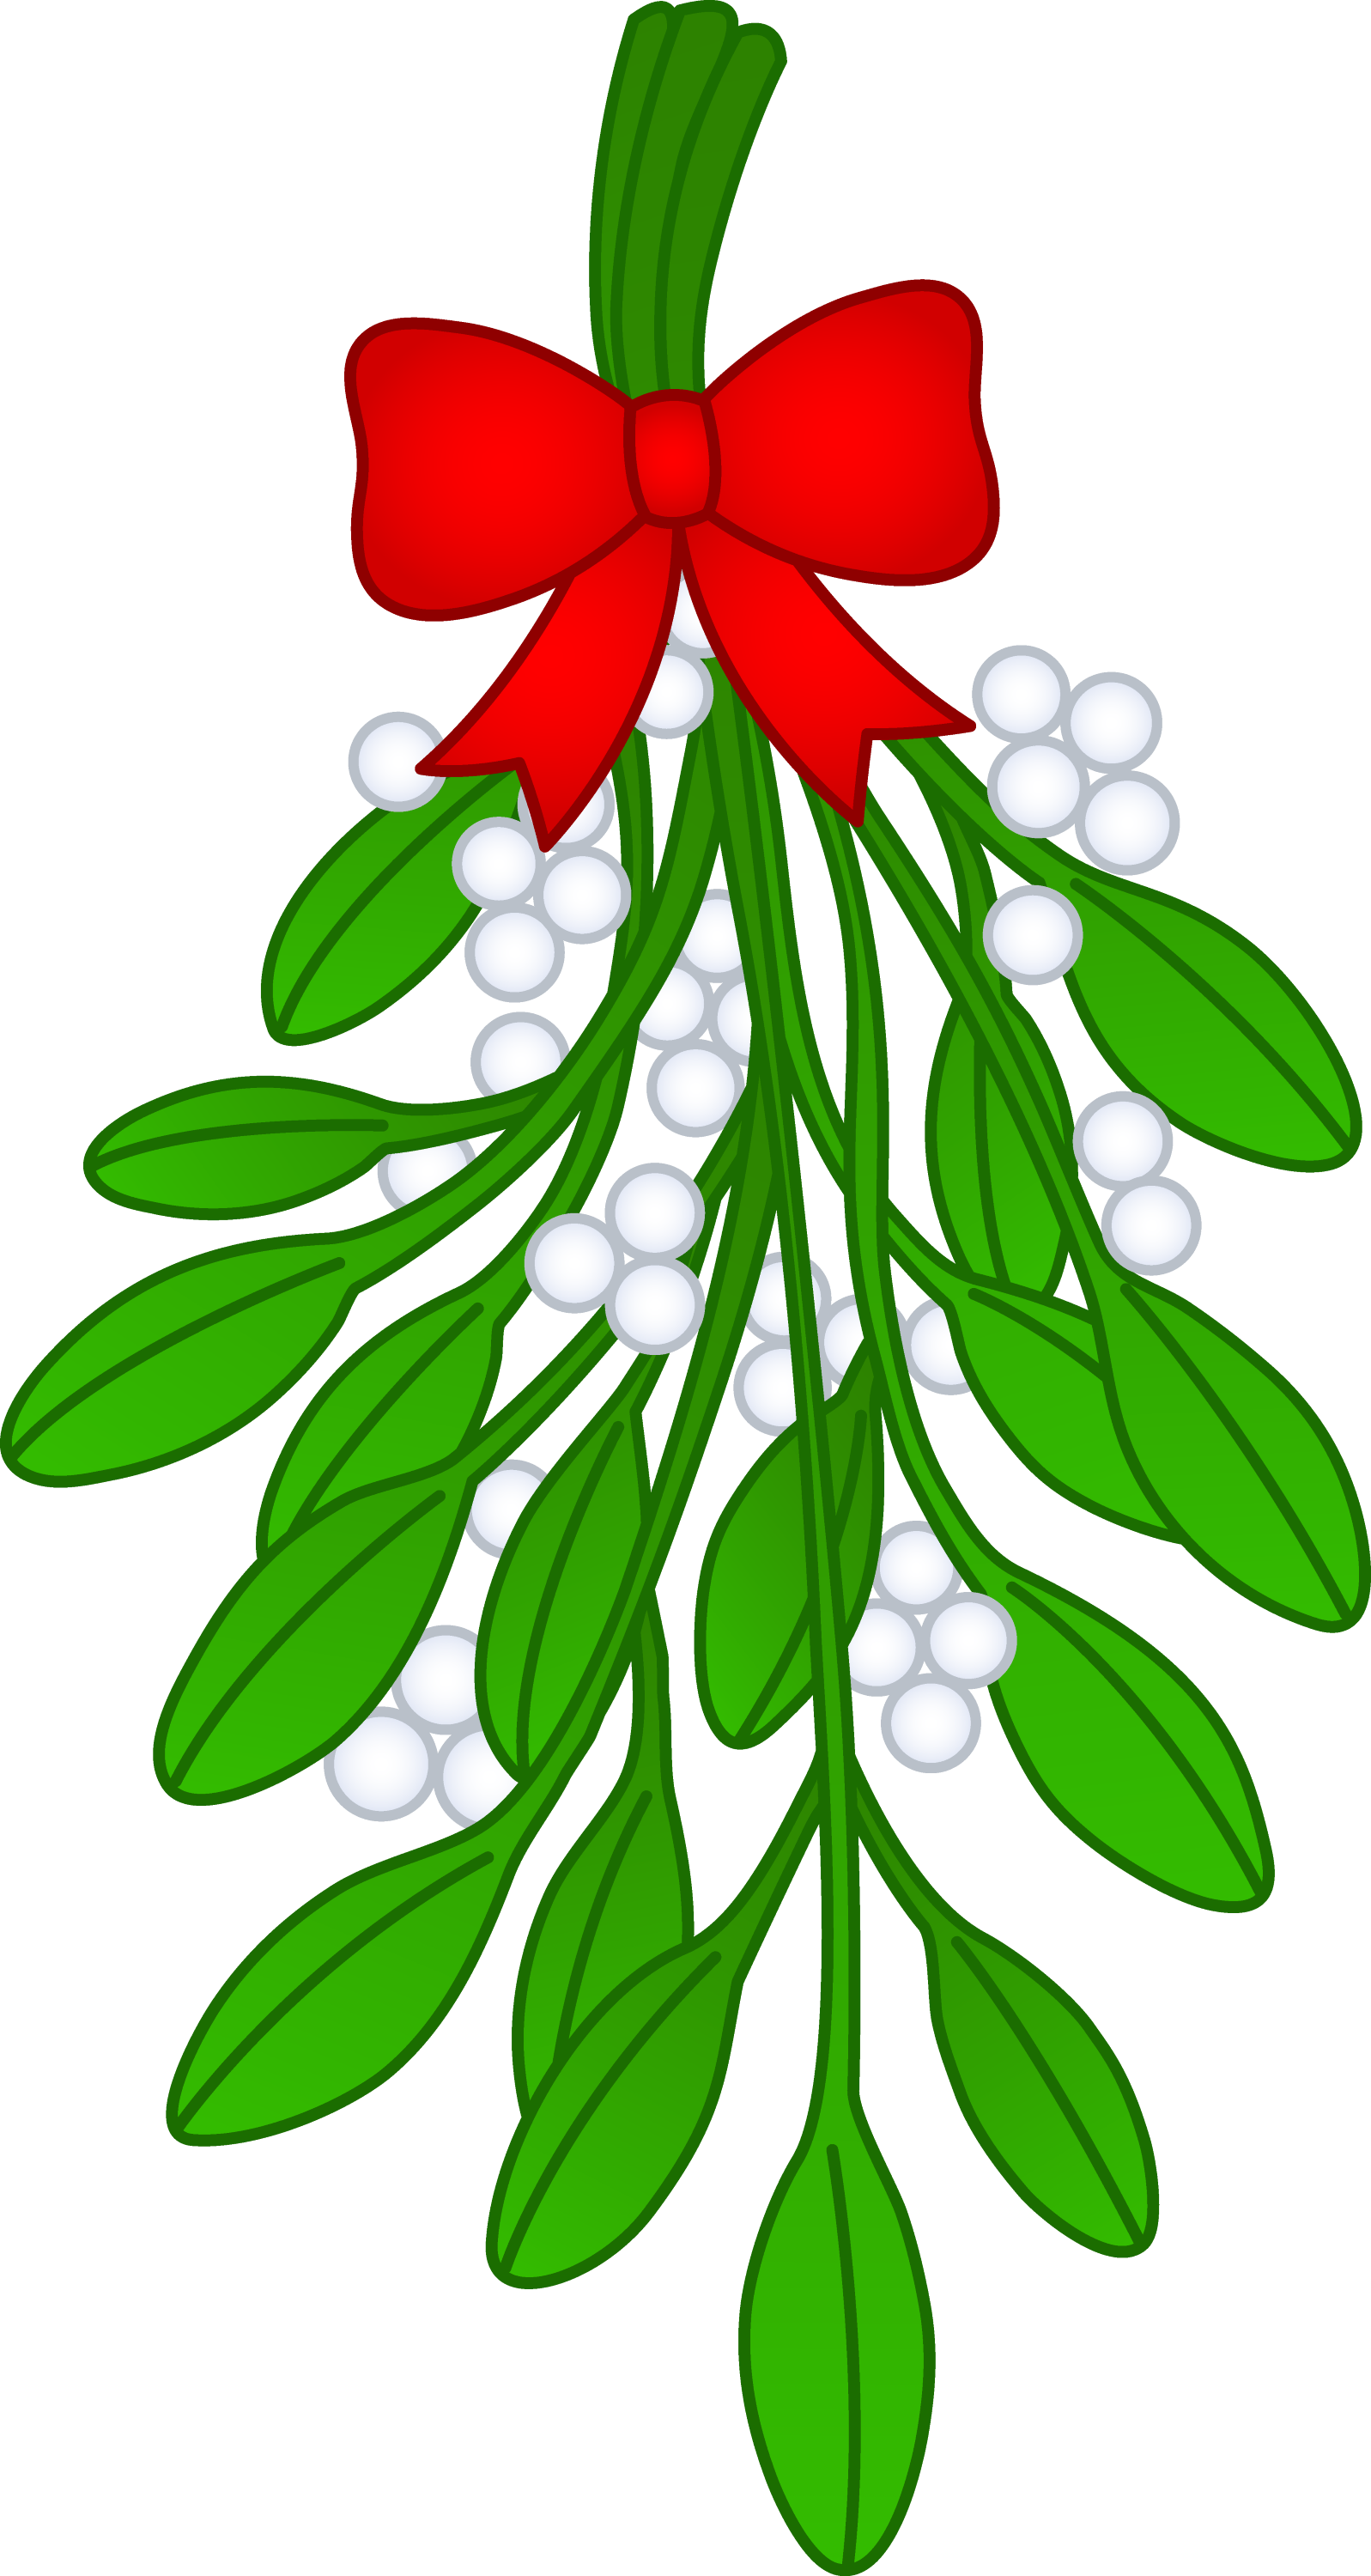 Christmas Mistletoe With Red Bow - Free Clip Art